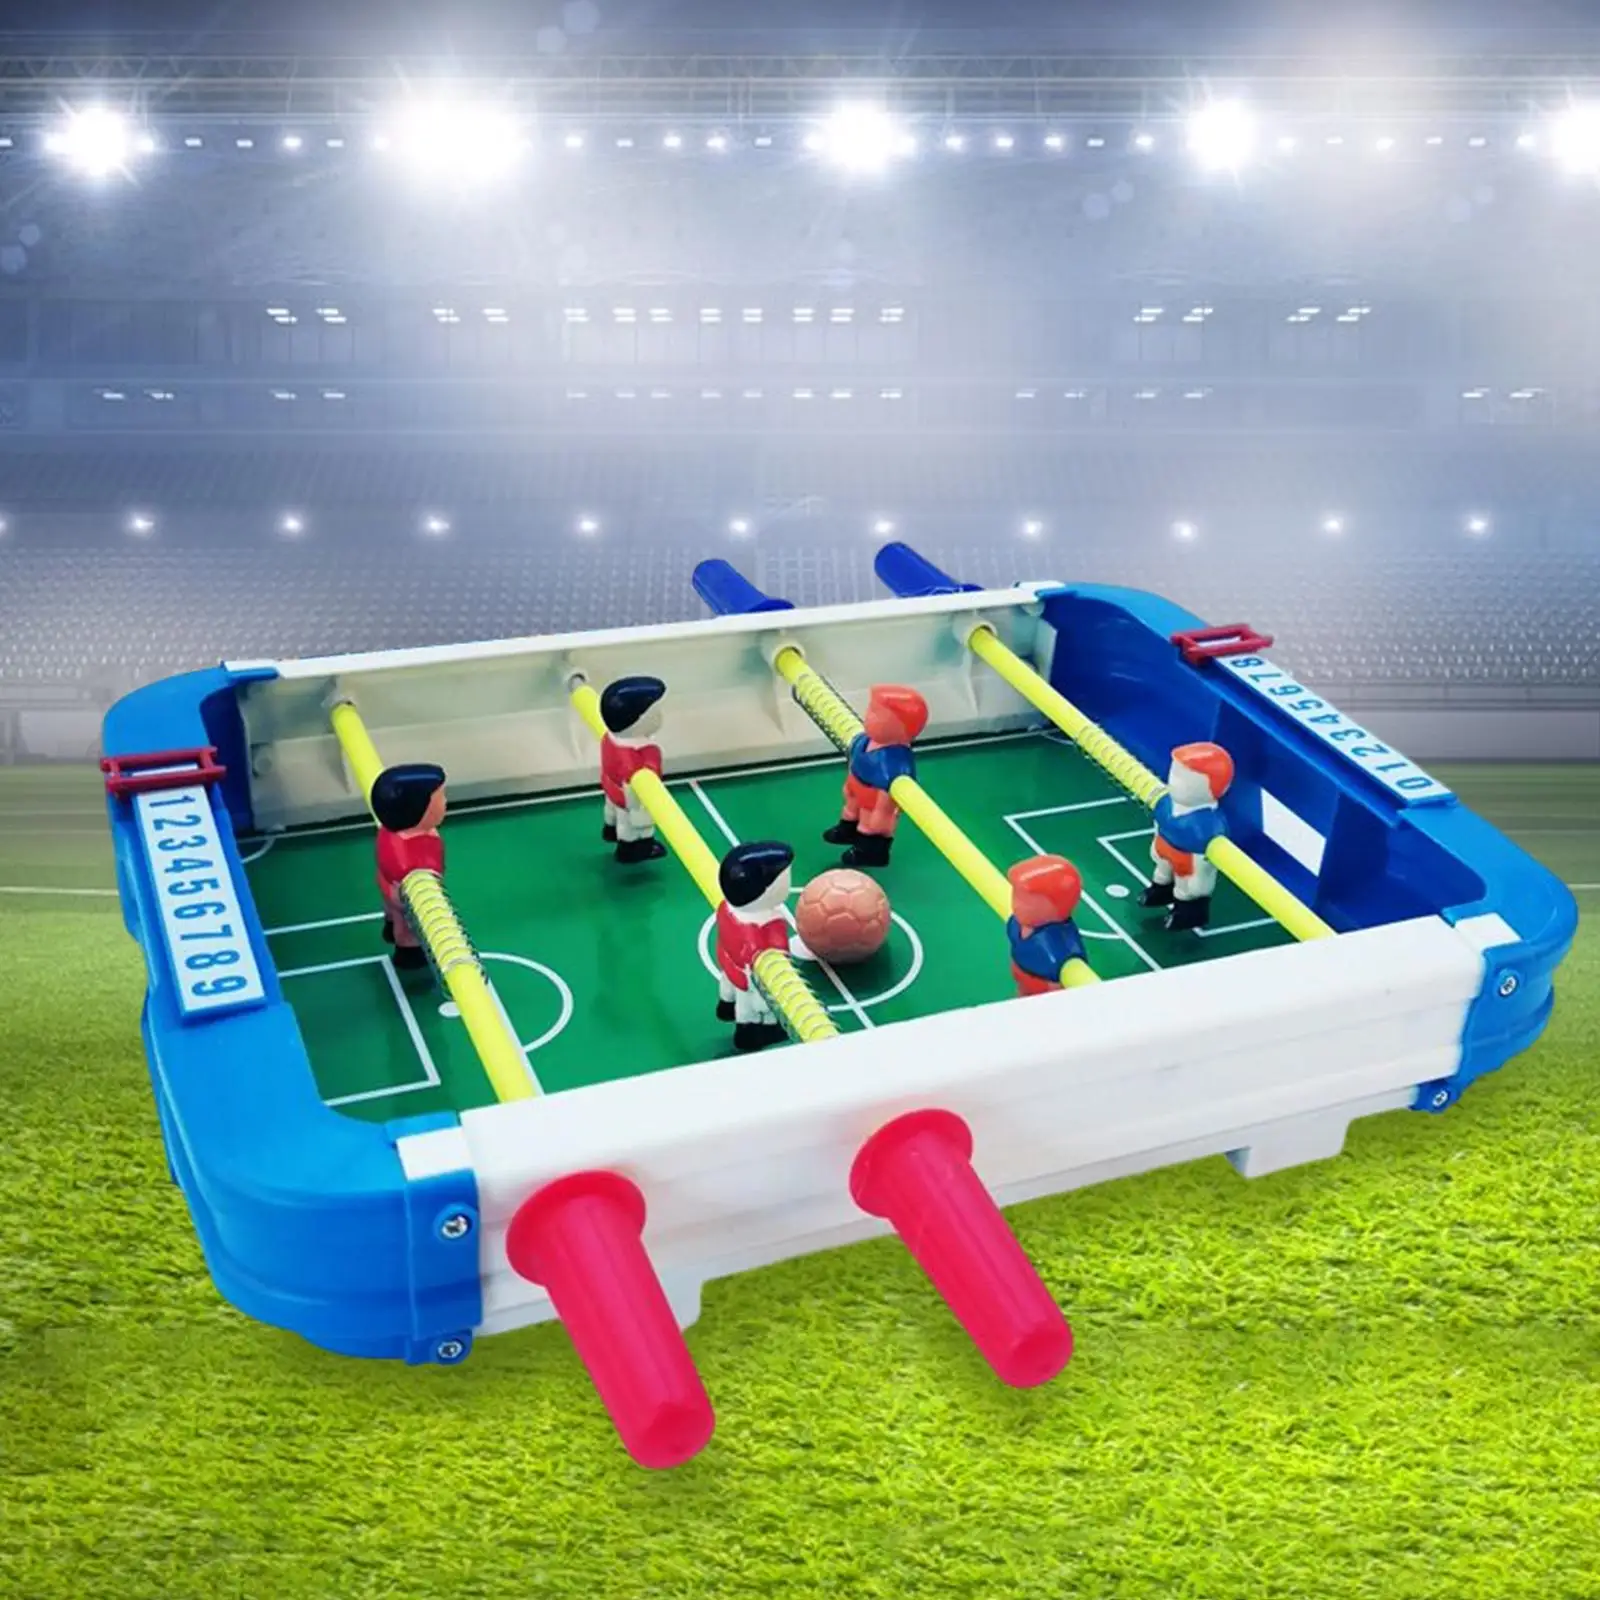 Foosball Table, Tabletop Football Game Interactive Toy Table Top Soccer Game for Parent Child Interaction Adults Kids